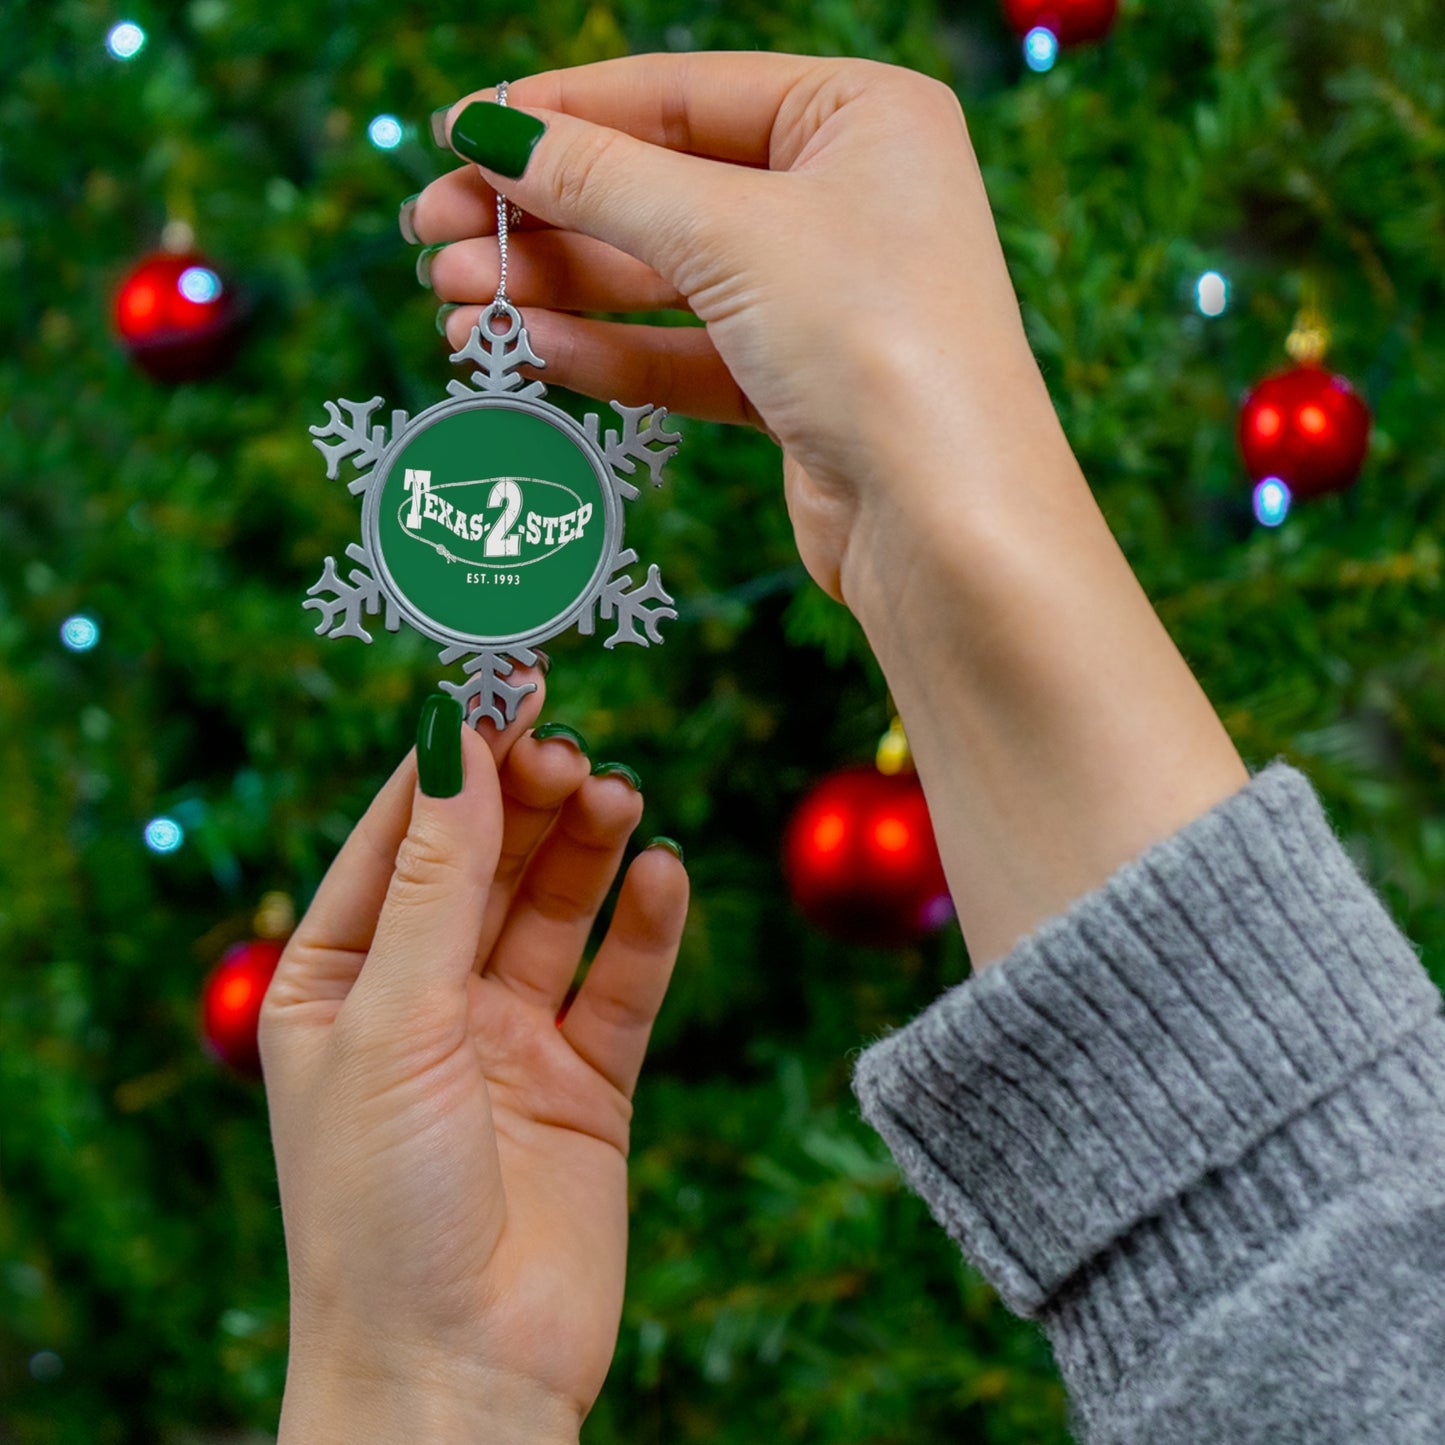 T2S Pewter Snowflake Ornament (T2S logo front-green, blank back)